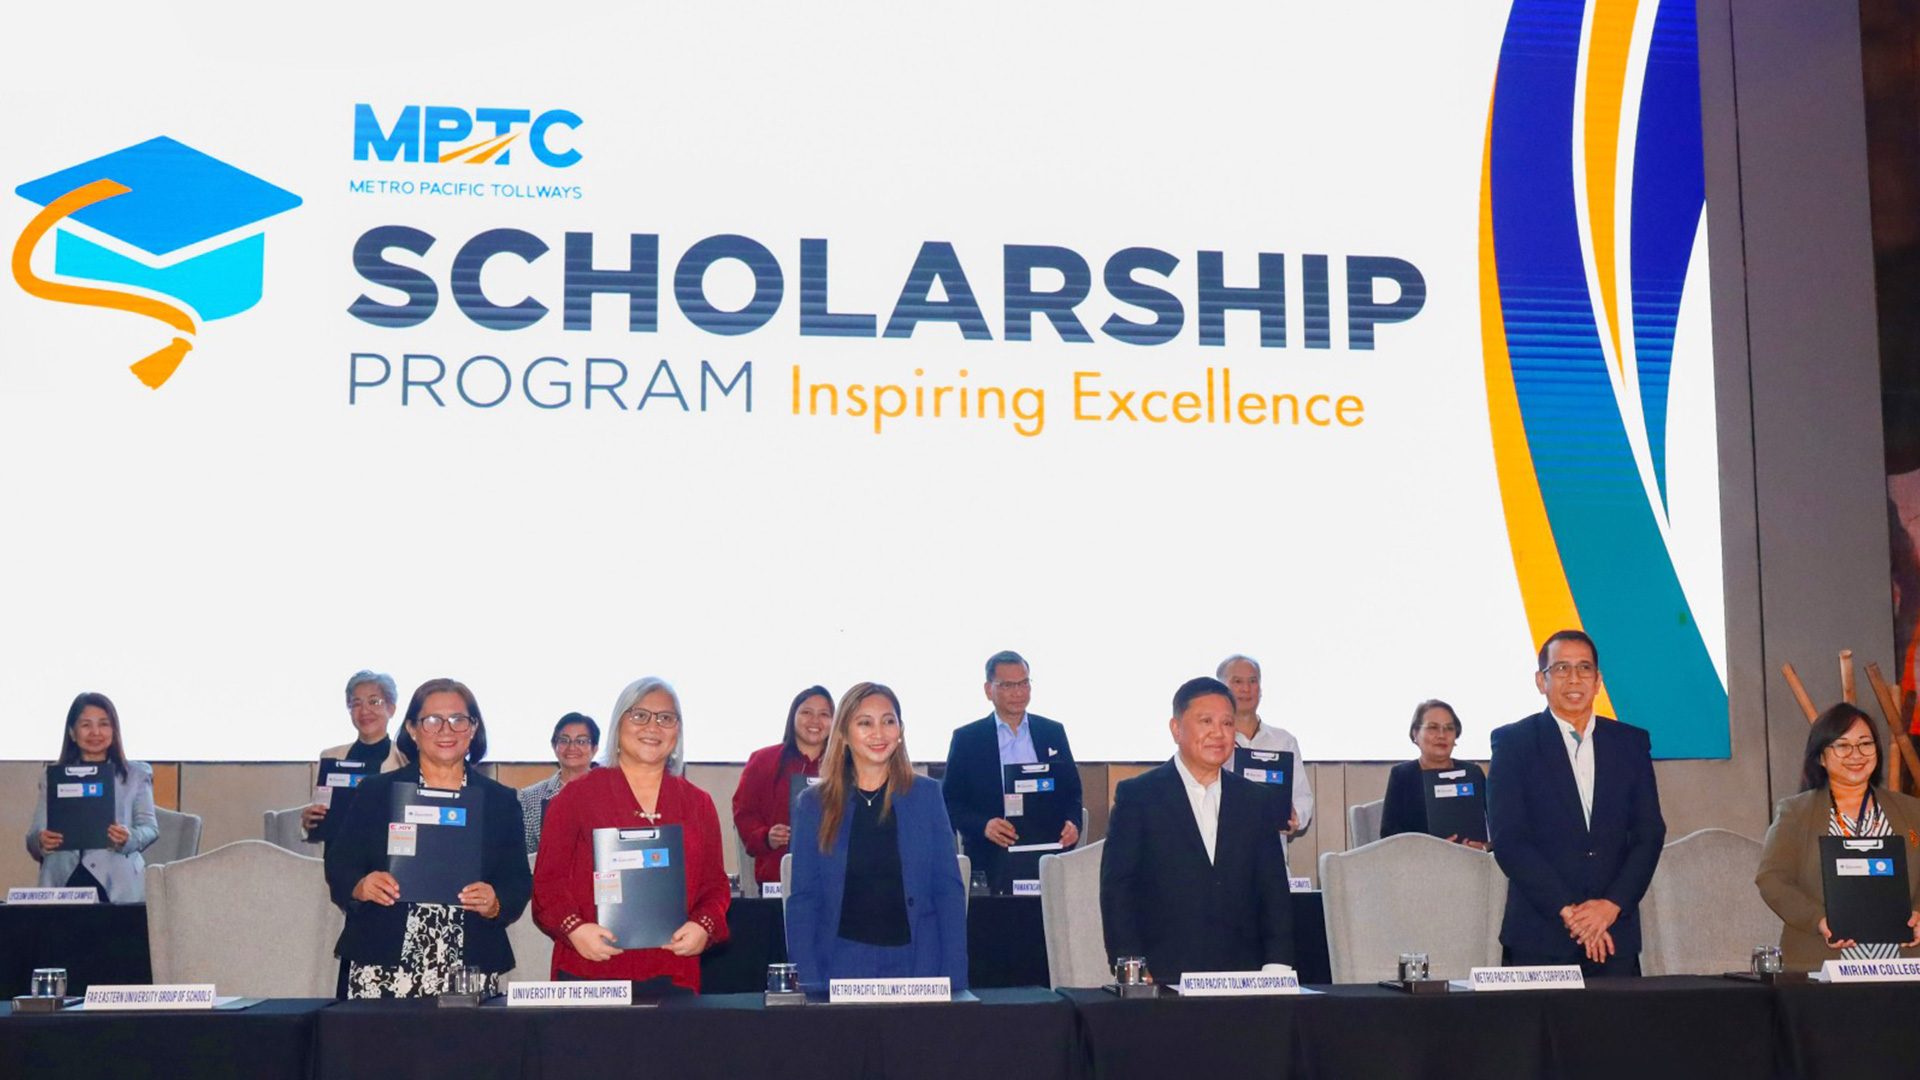 MPTC offers scholarship program for Accounting, Education, Engineering, IT courses in partner schools